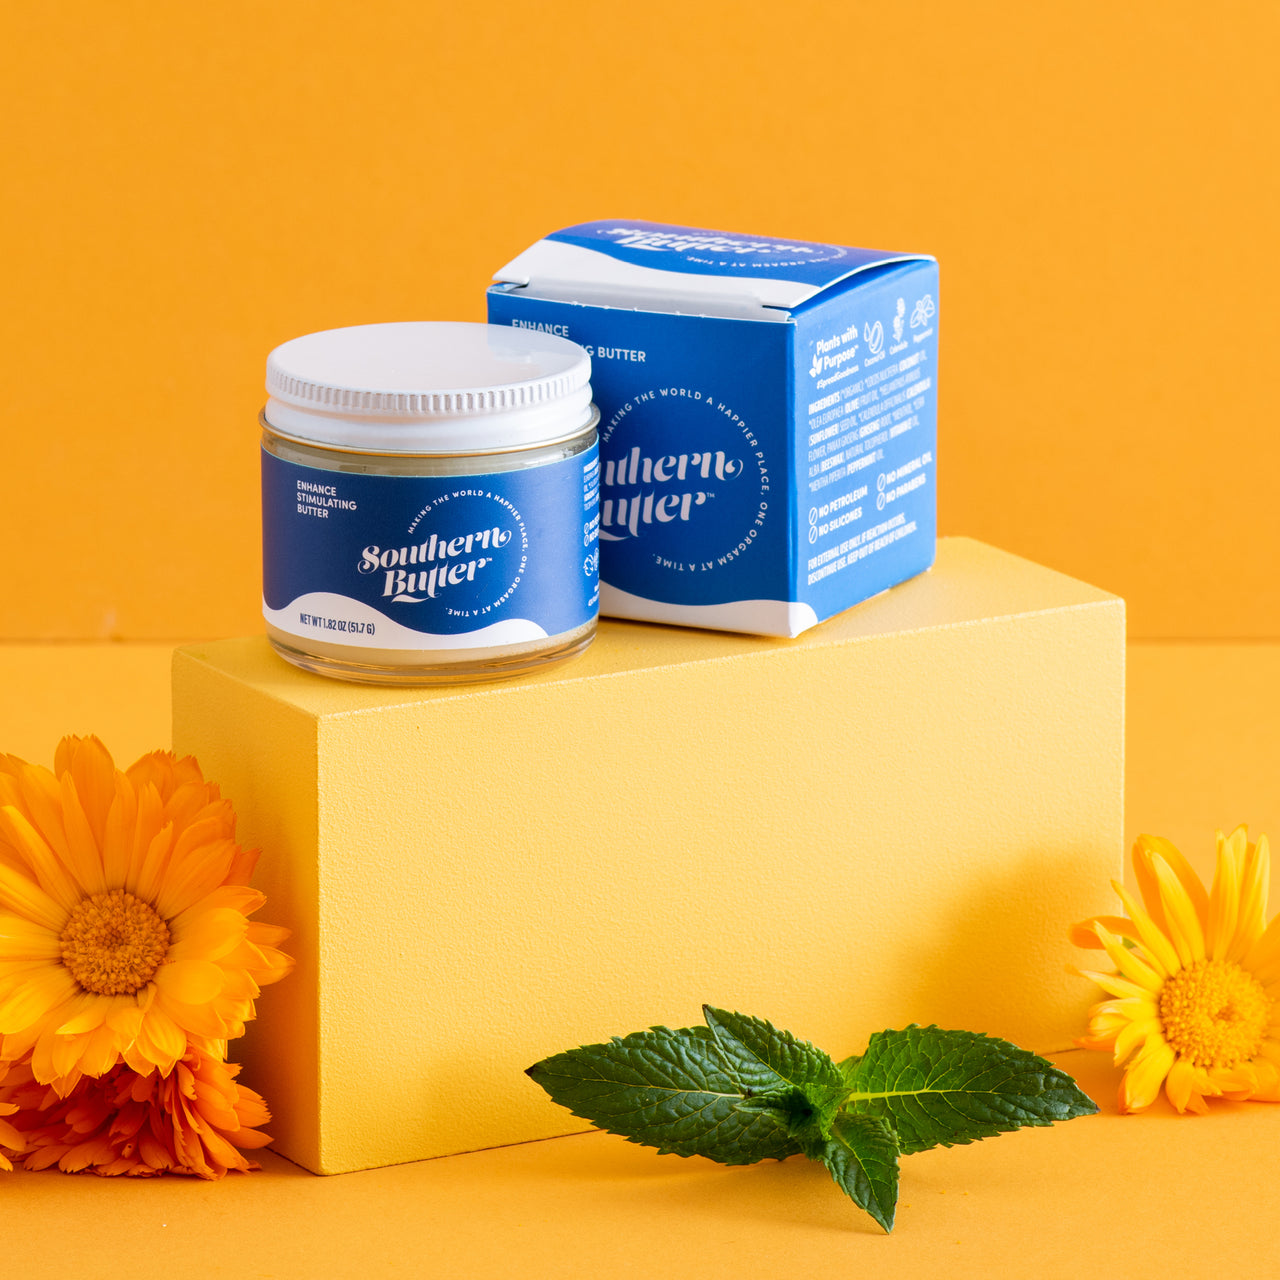 Enhance Stimulating Butter by Southern Butter